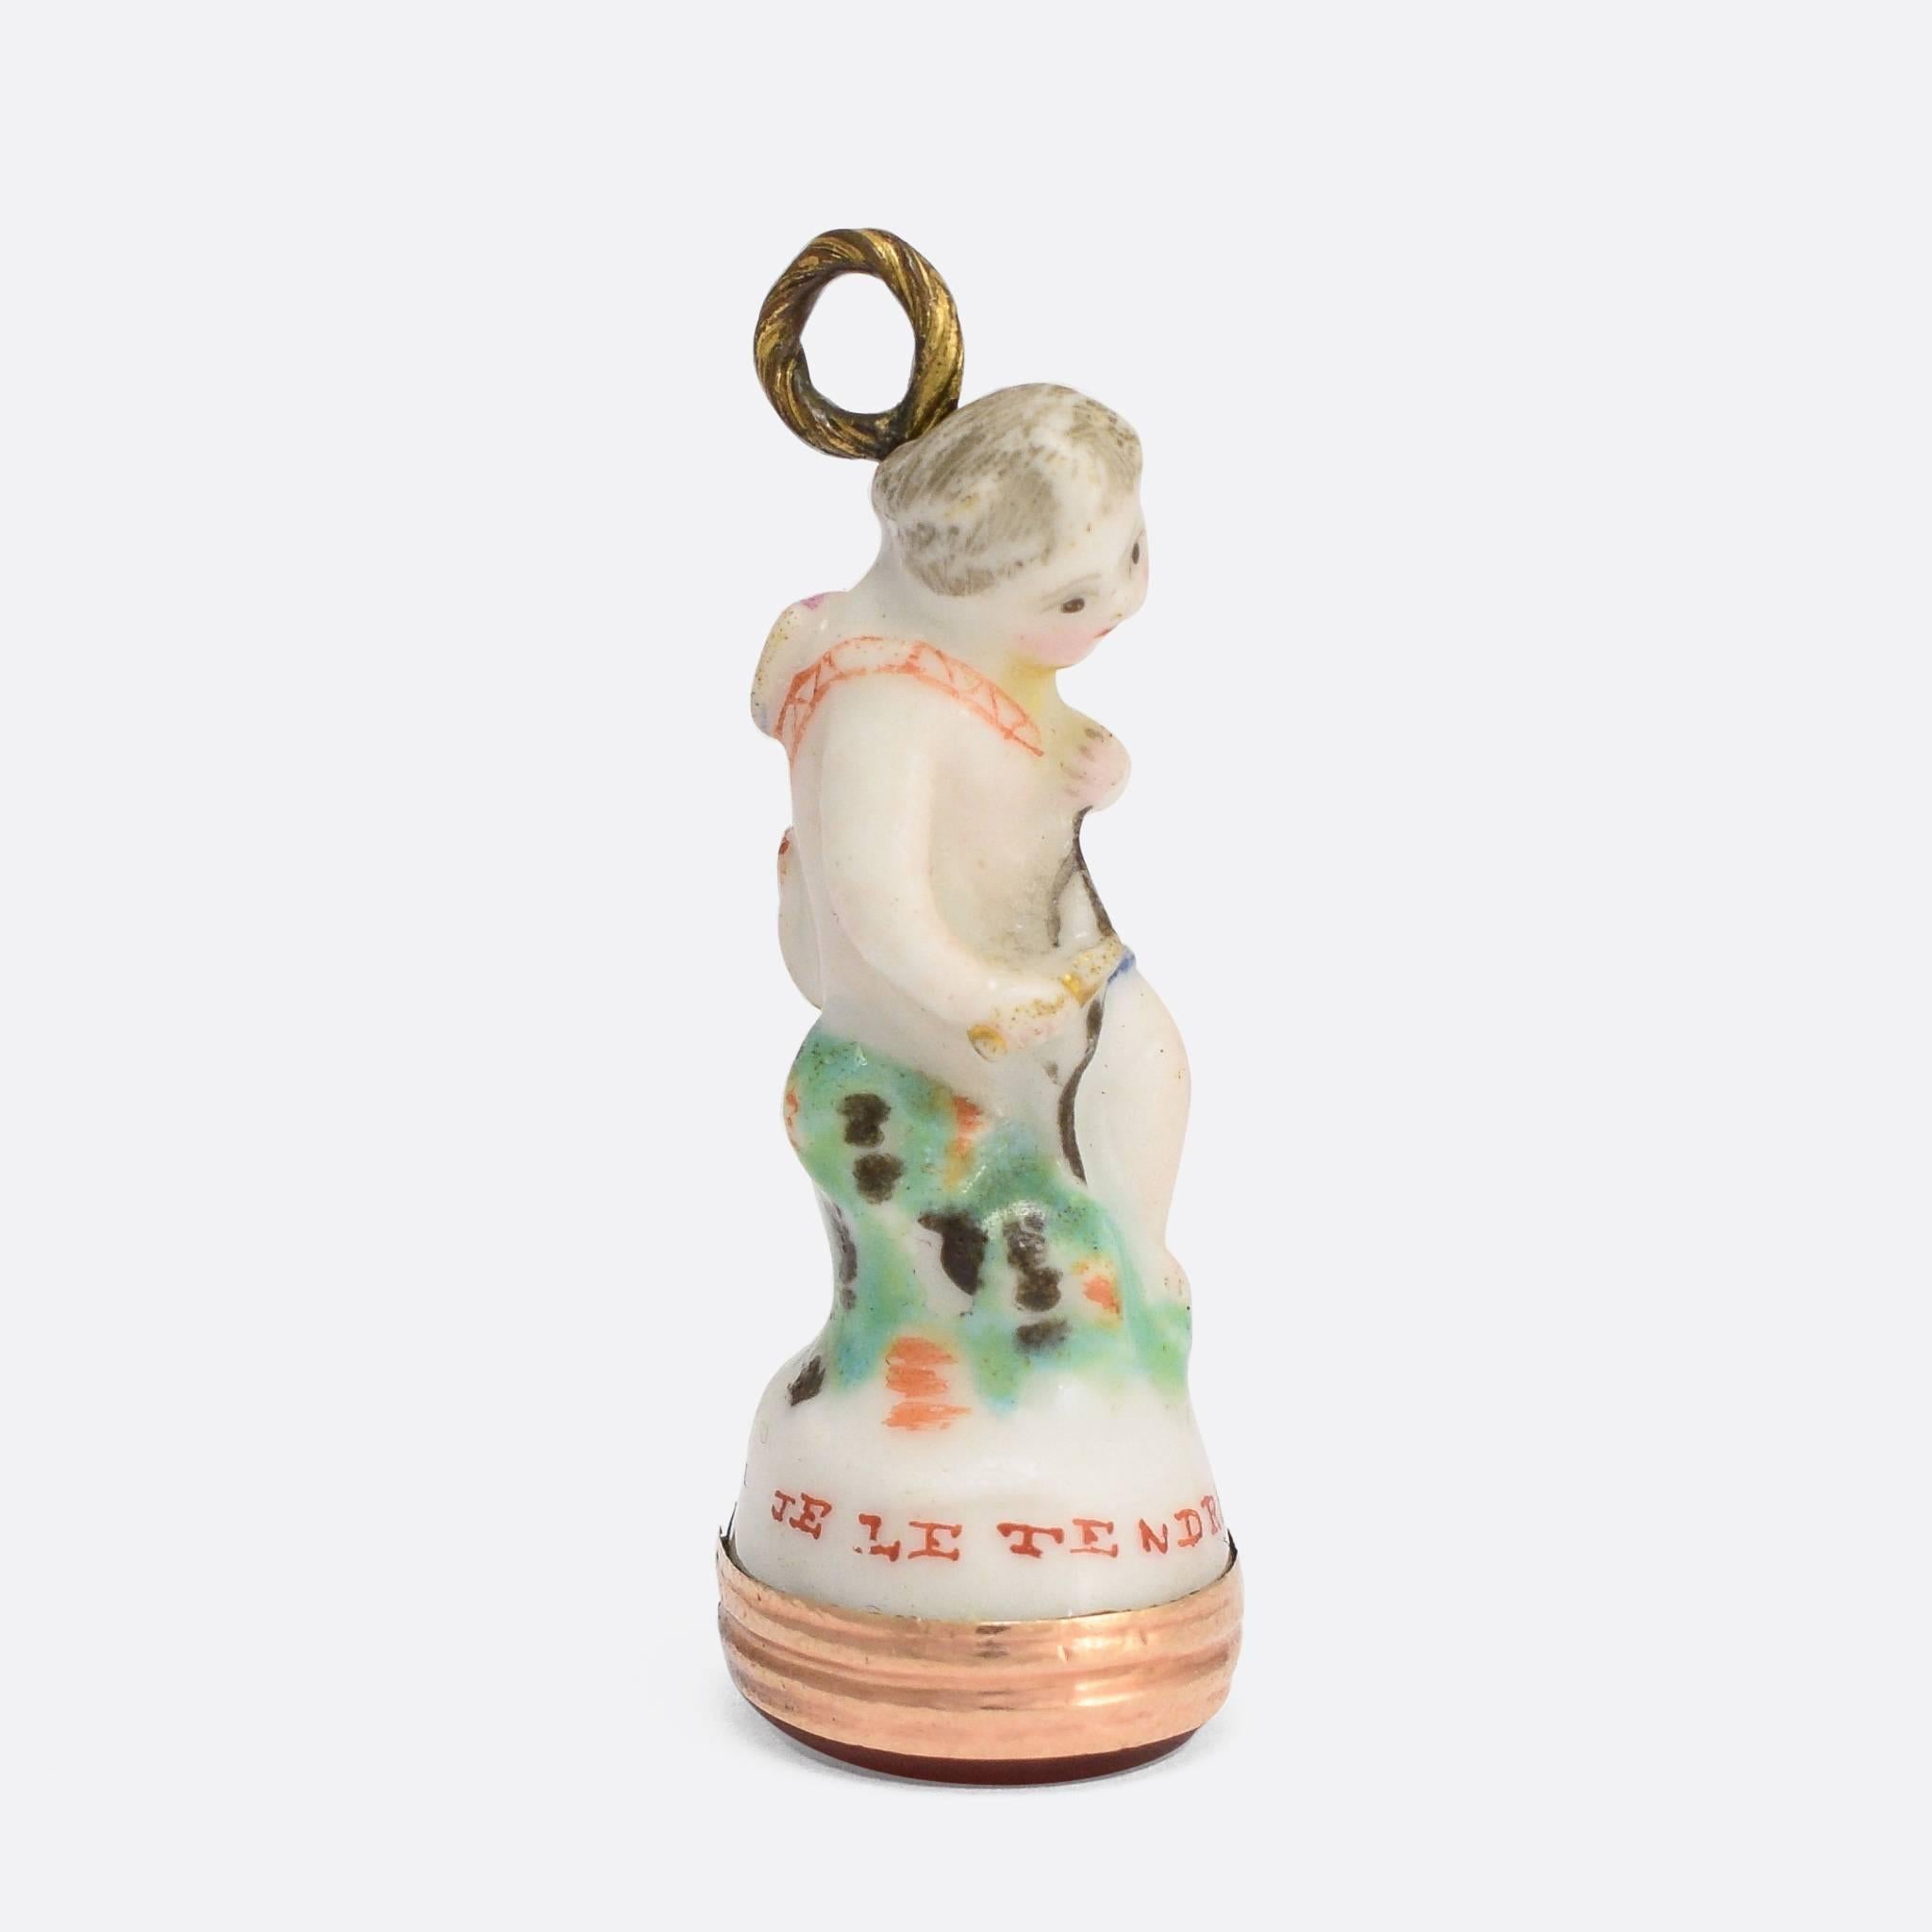 An original 18th Century porcelain Derby Chelsea period fob seal. This particular piece features Cupid holding his bow, with arrow quiver slung over one shoulder, and displays the pale colouring typical of the Chelsea factory. The intaglio carved